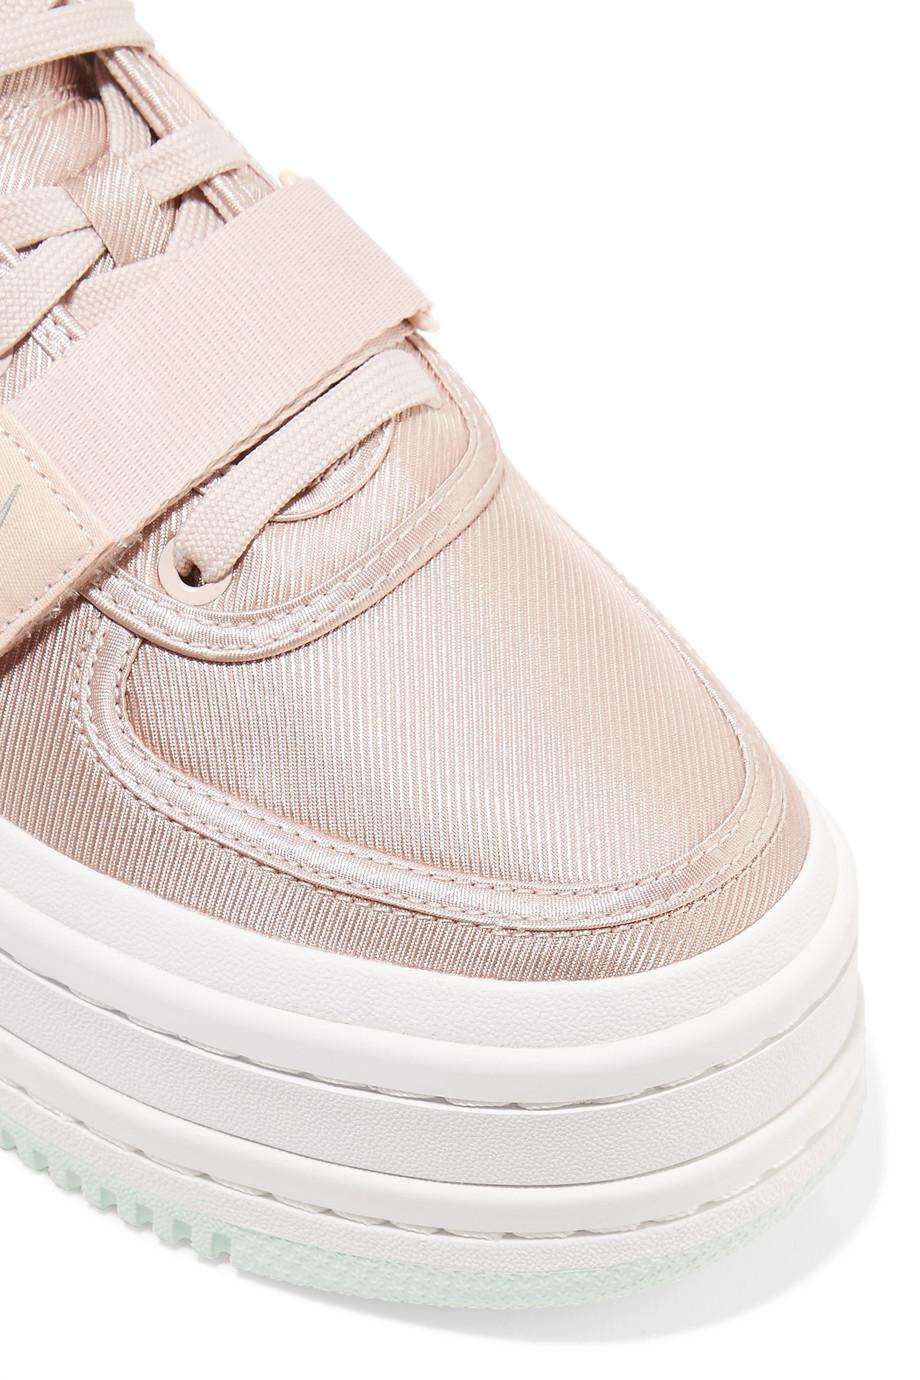 Nike 2k Leather-trimmed Metallic Faille Platform Sneakers in Pink | Lyst